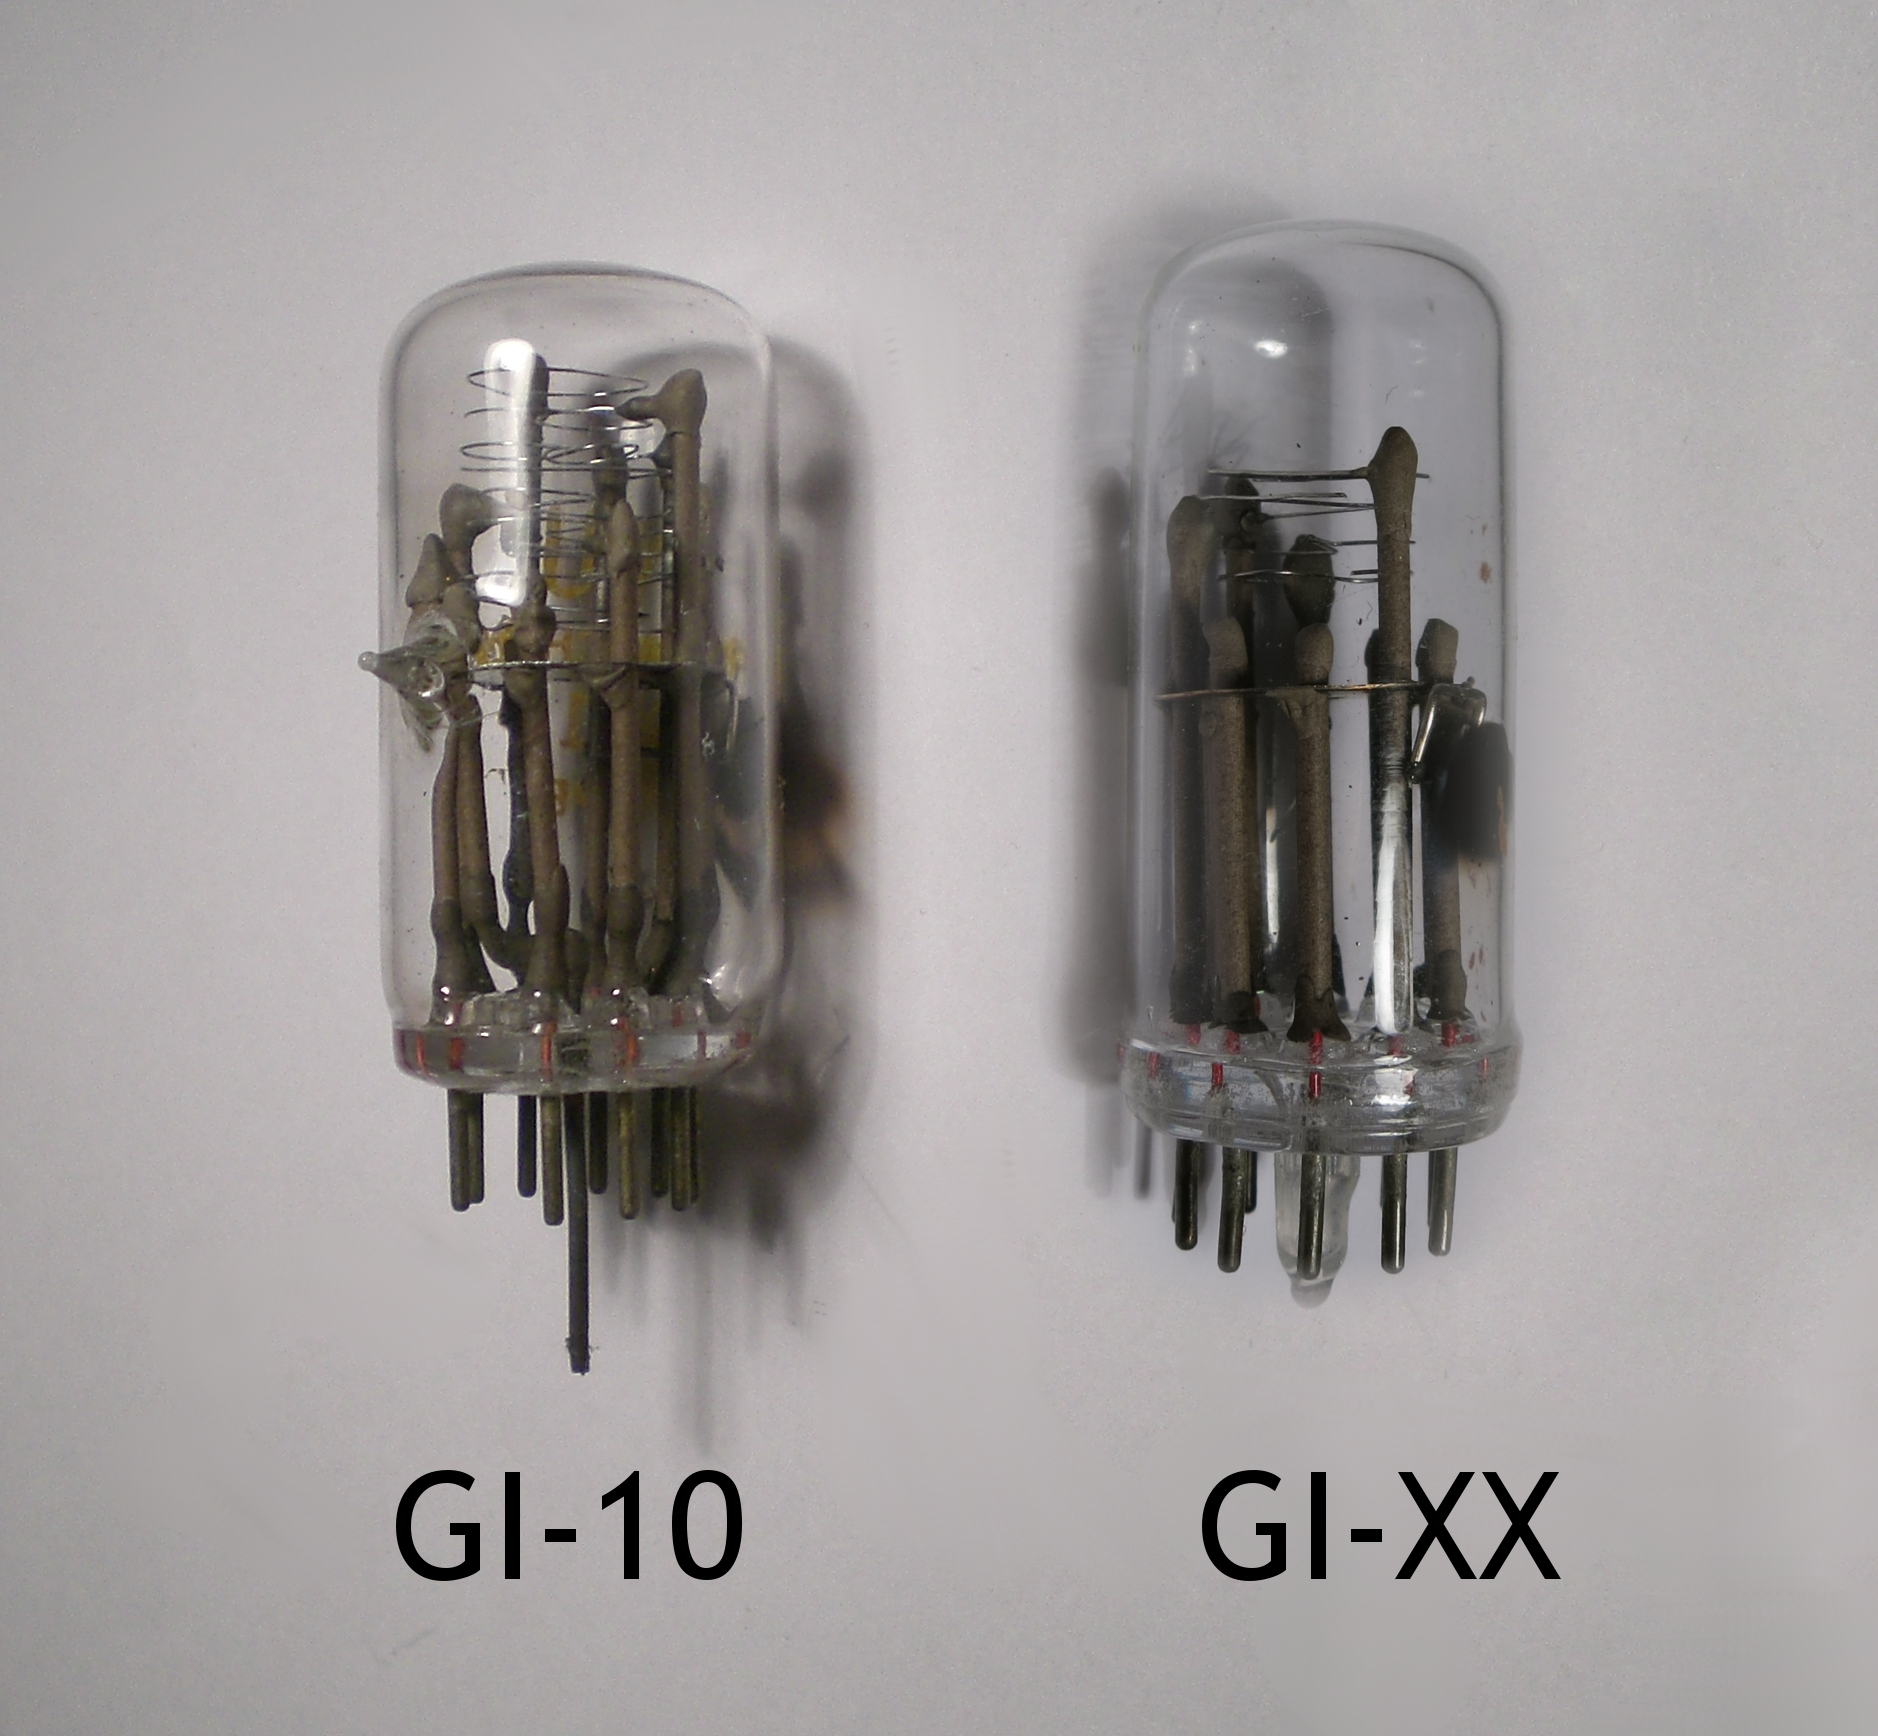 The GI-10 and the GI-XX in comparison